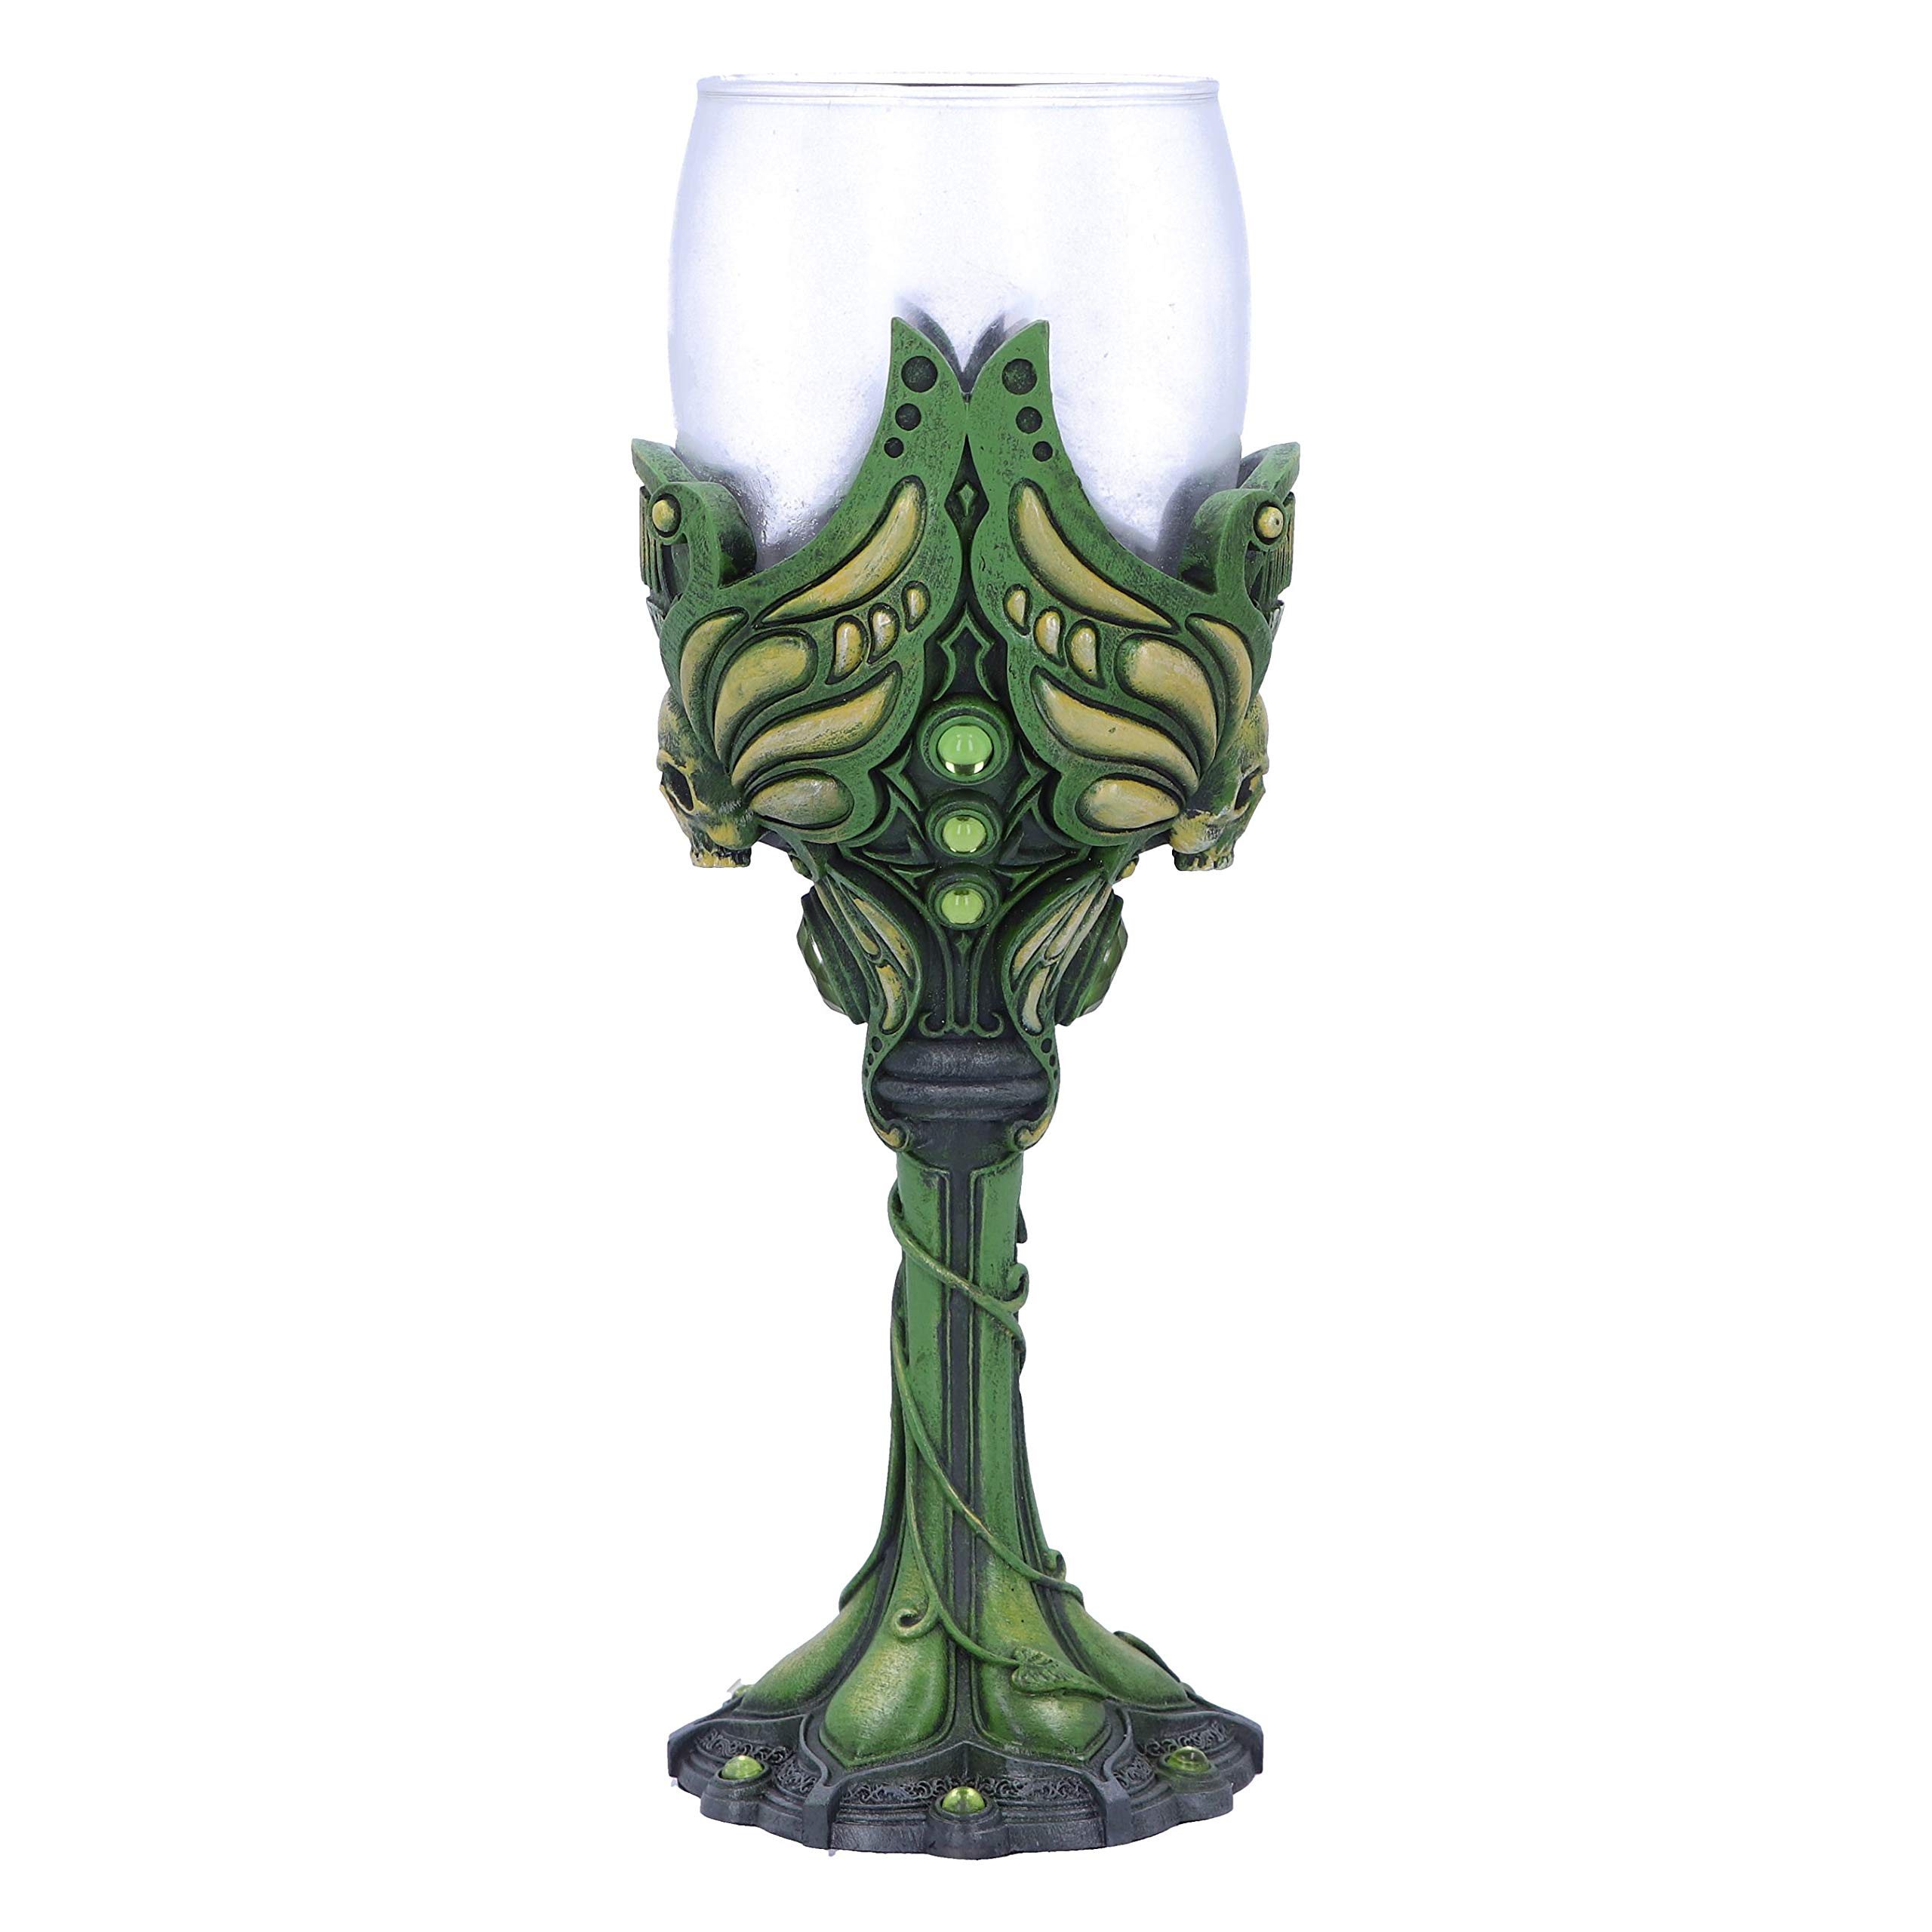 Nemesis Now Absinthe La Fee Verte Green Goblet Wine Glass, Polyresin, 1 Count (Pack of 1)